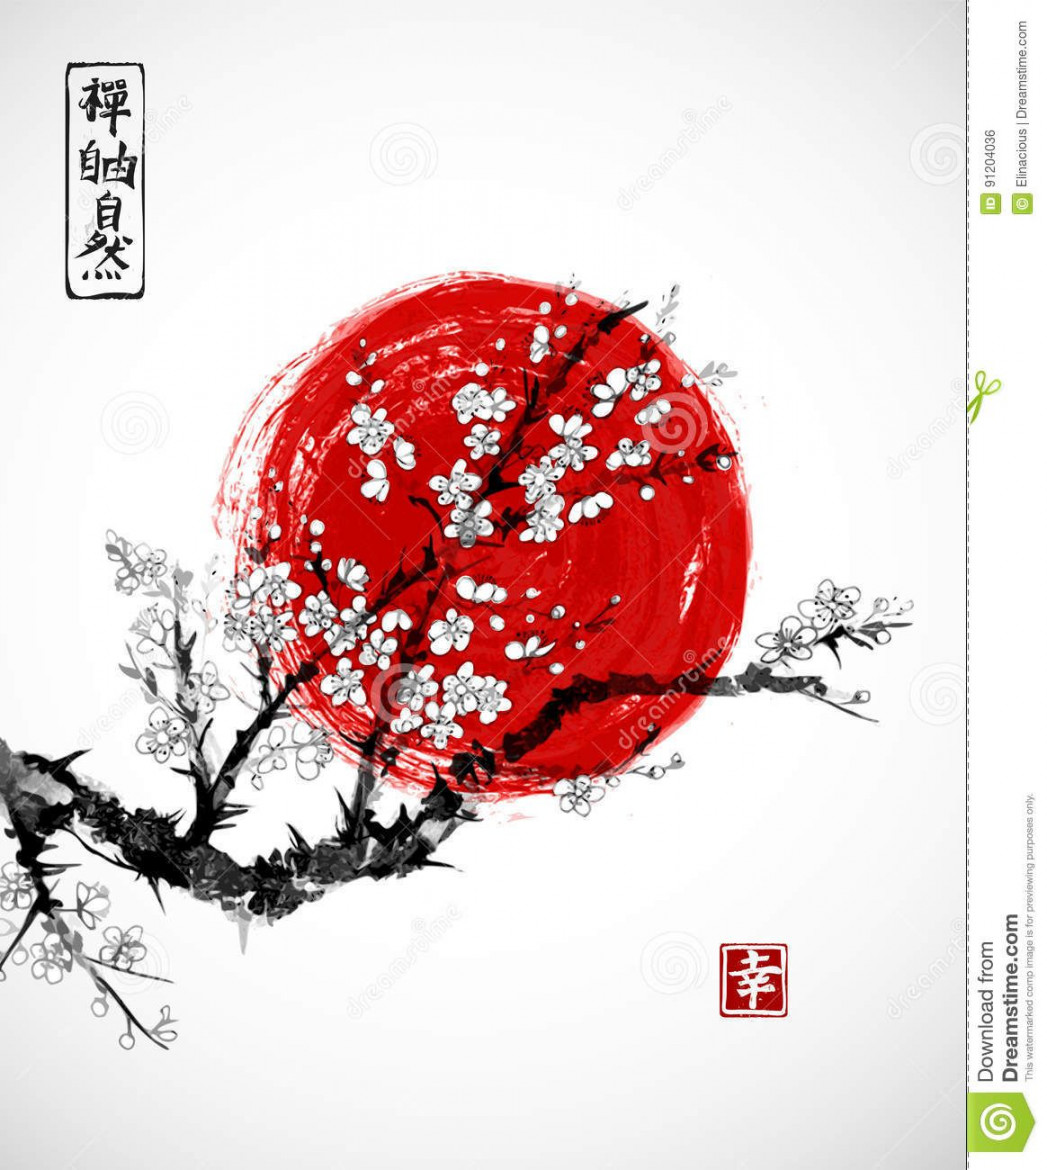 Sakura in blossom and red sun, symbol of Japan on white background